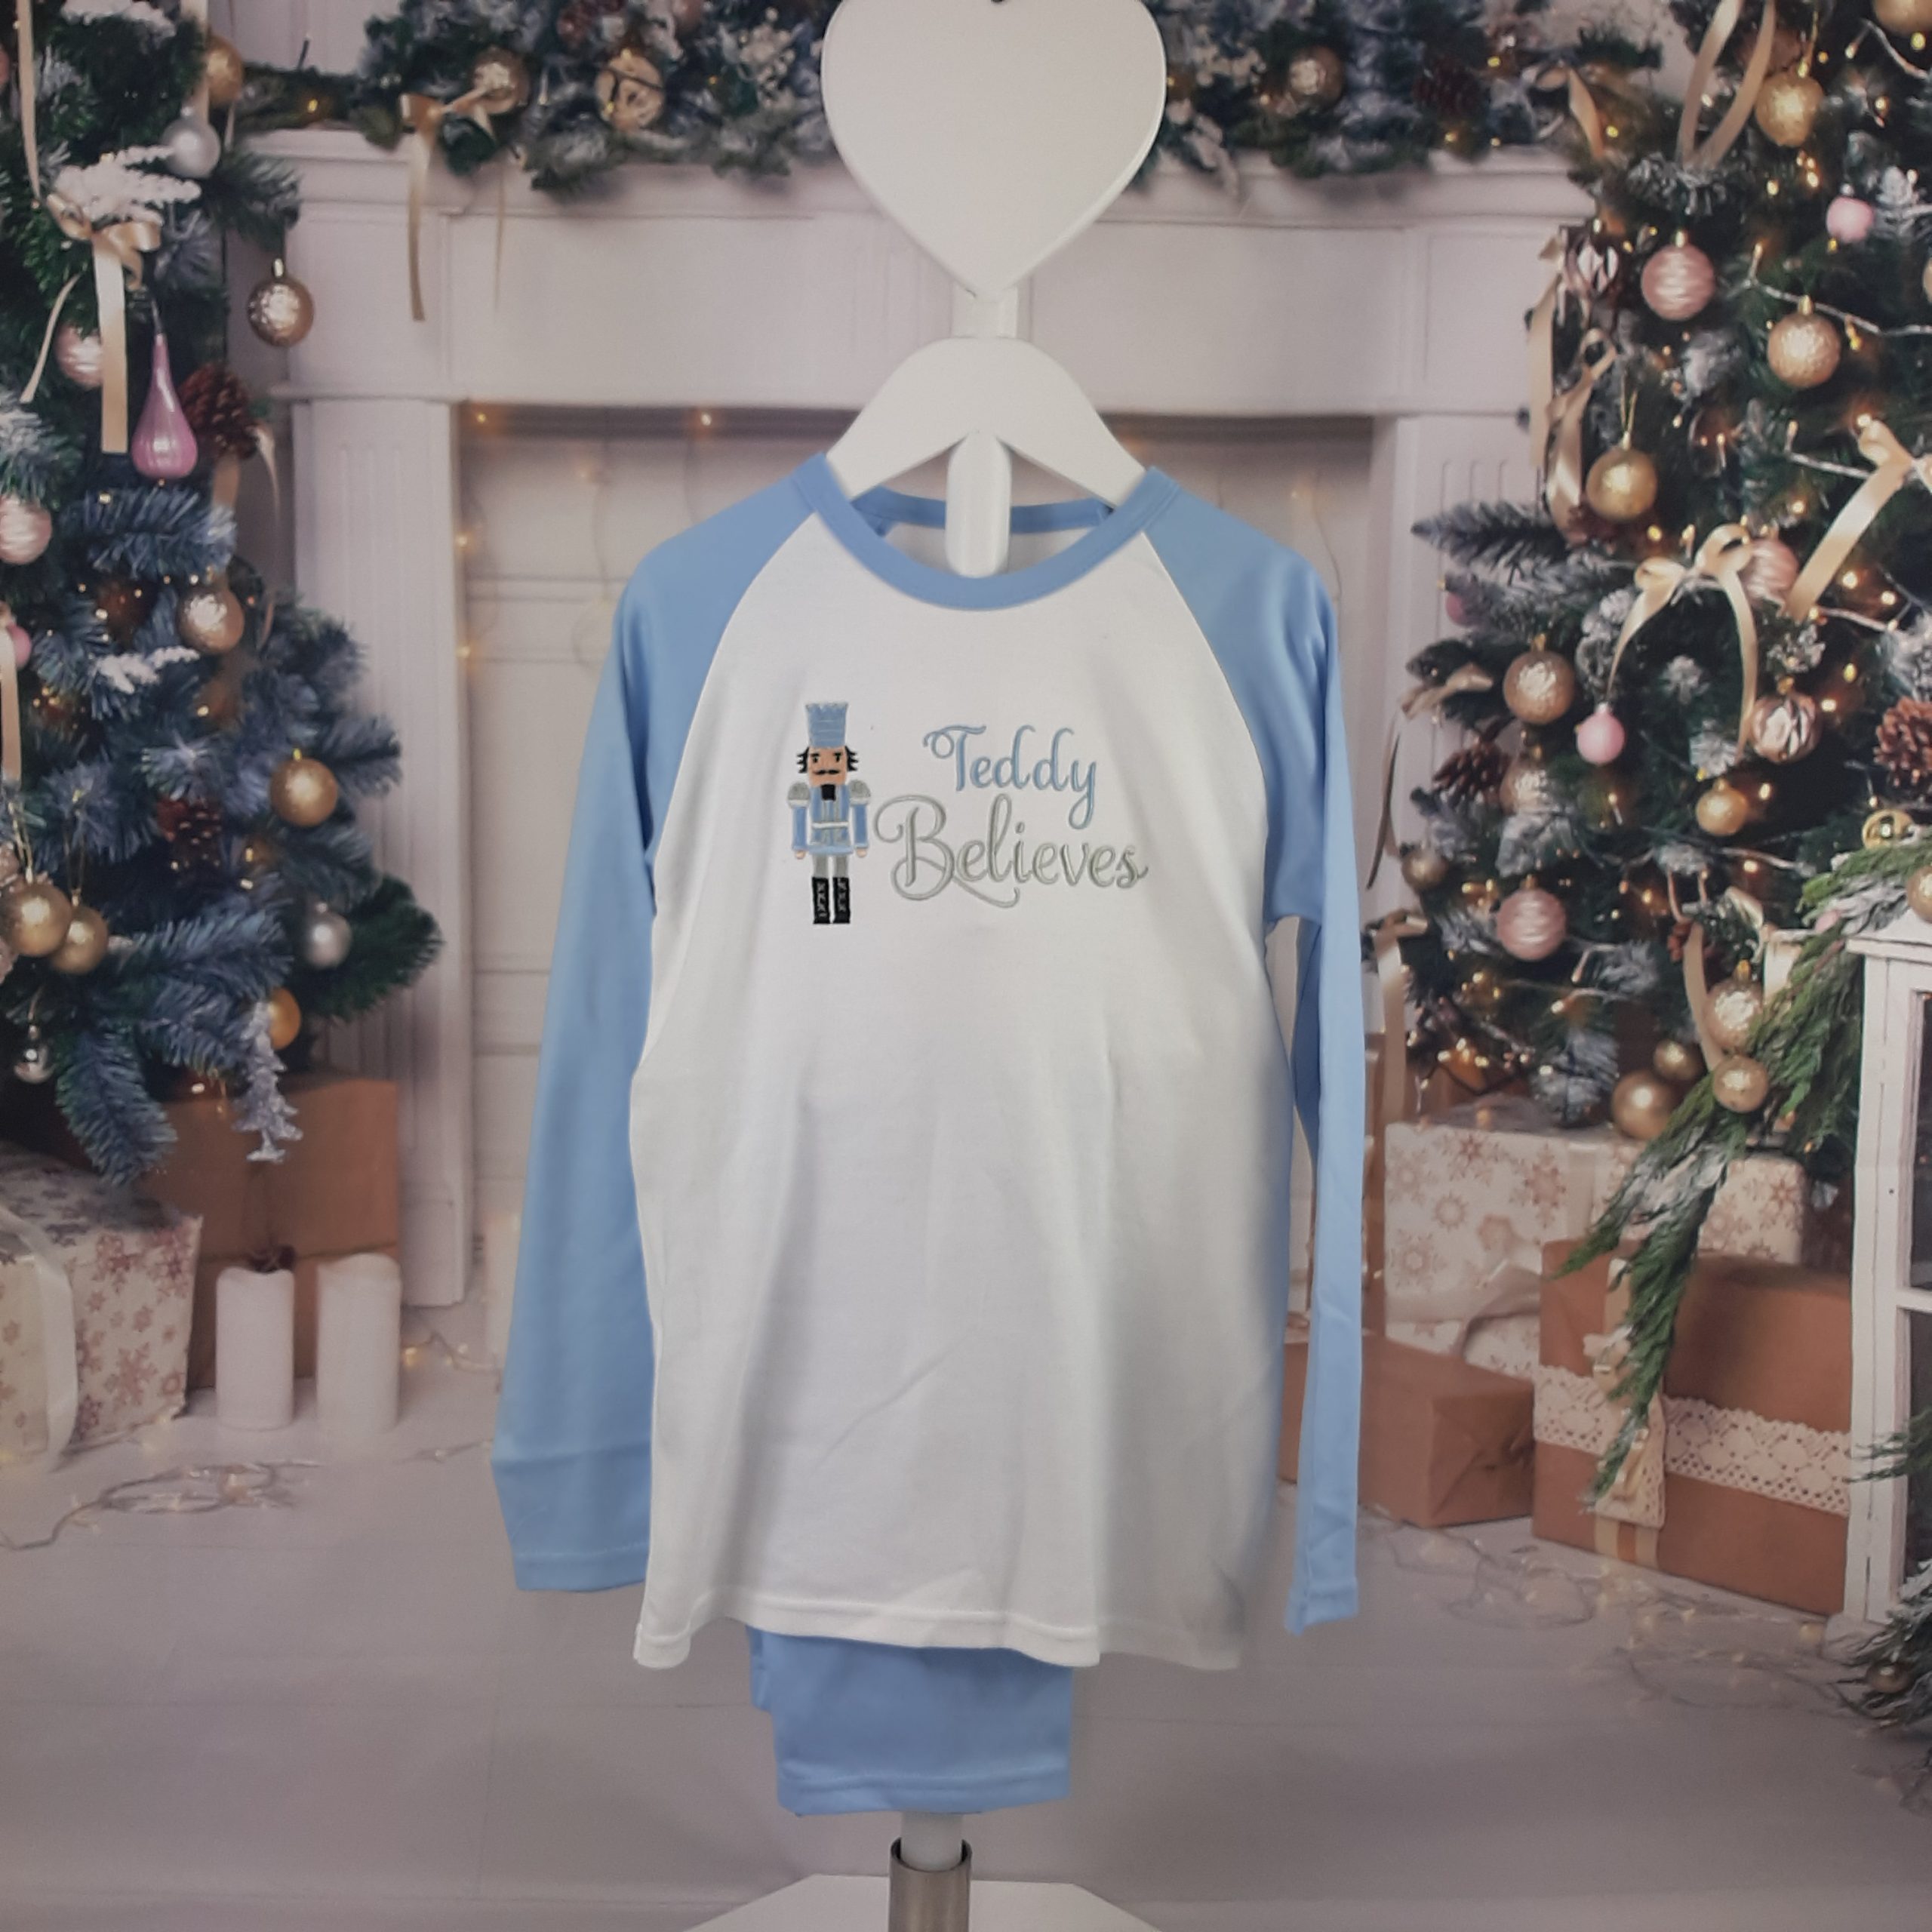 Nutcracker Christmas PJs in blue nd white for children with embroidered personalisation. Believes design